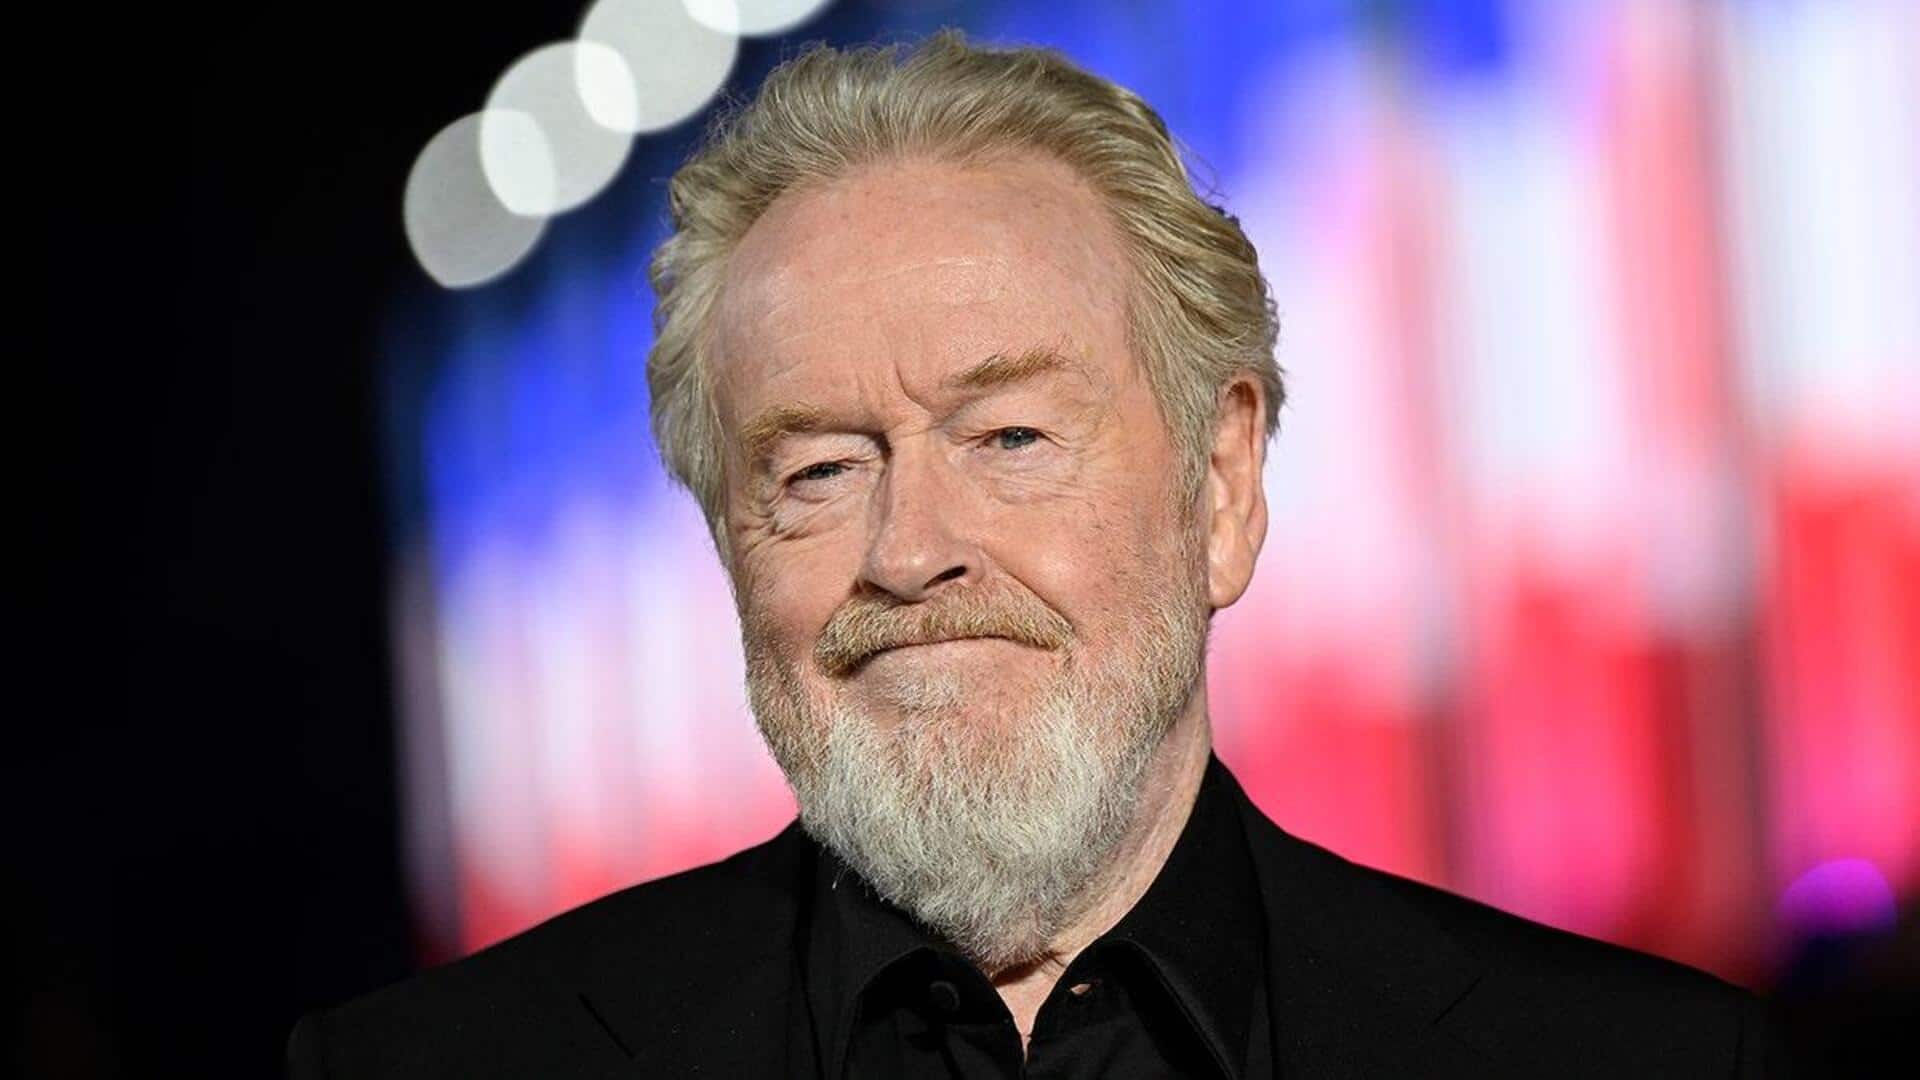 Ridley Scott in talks to direct biopic on Bee Gees